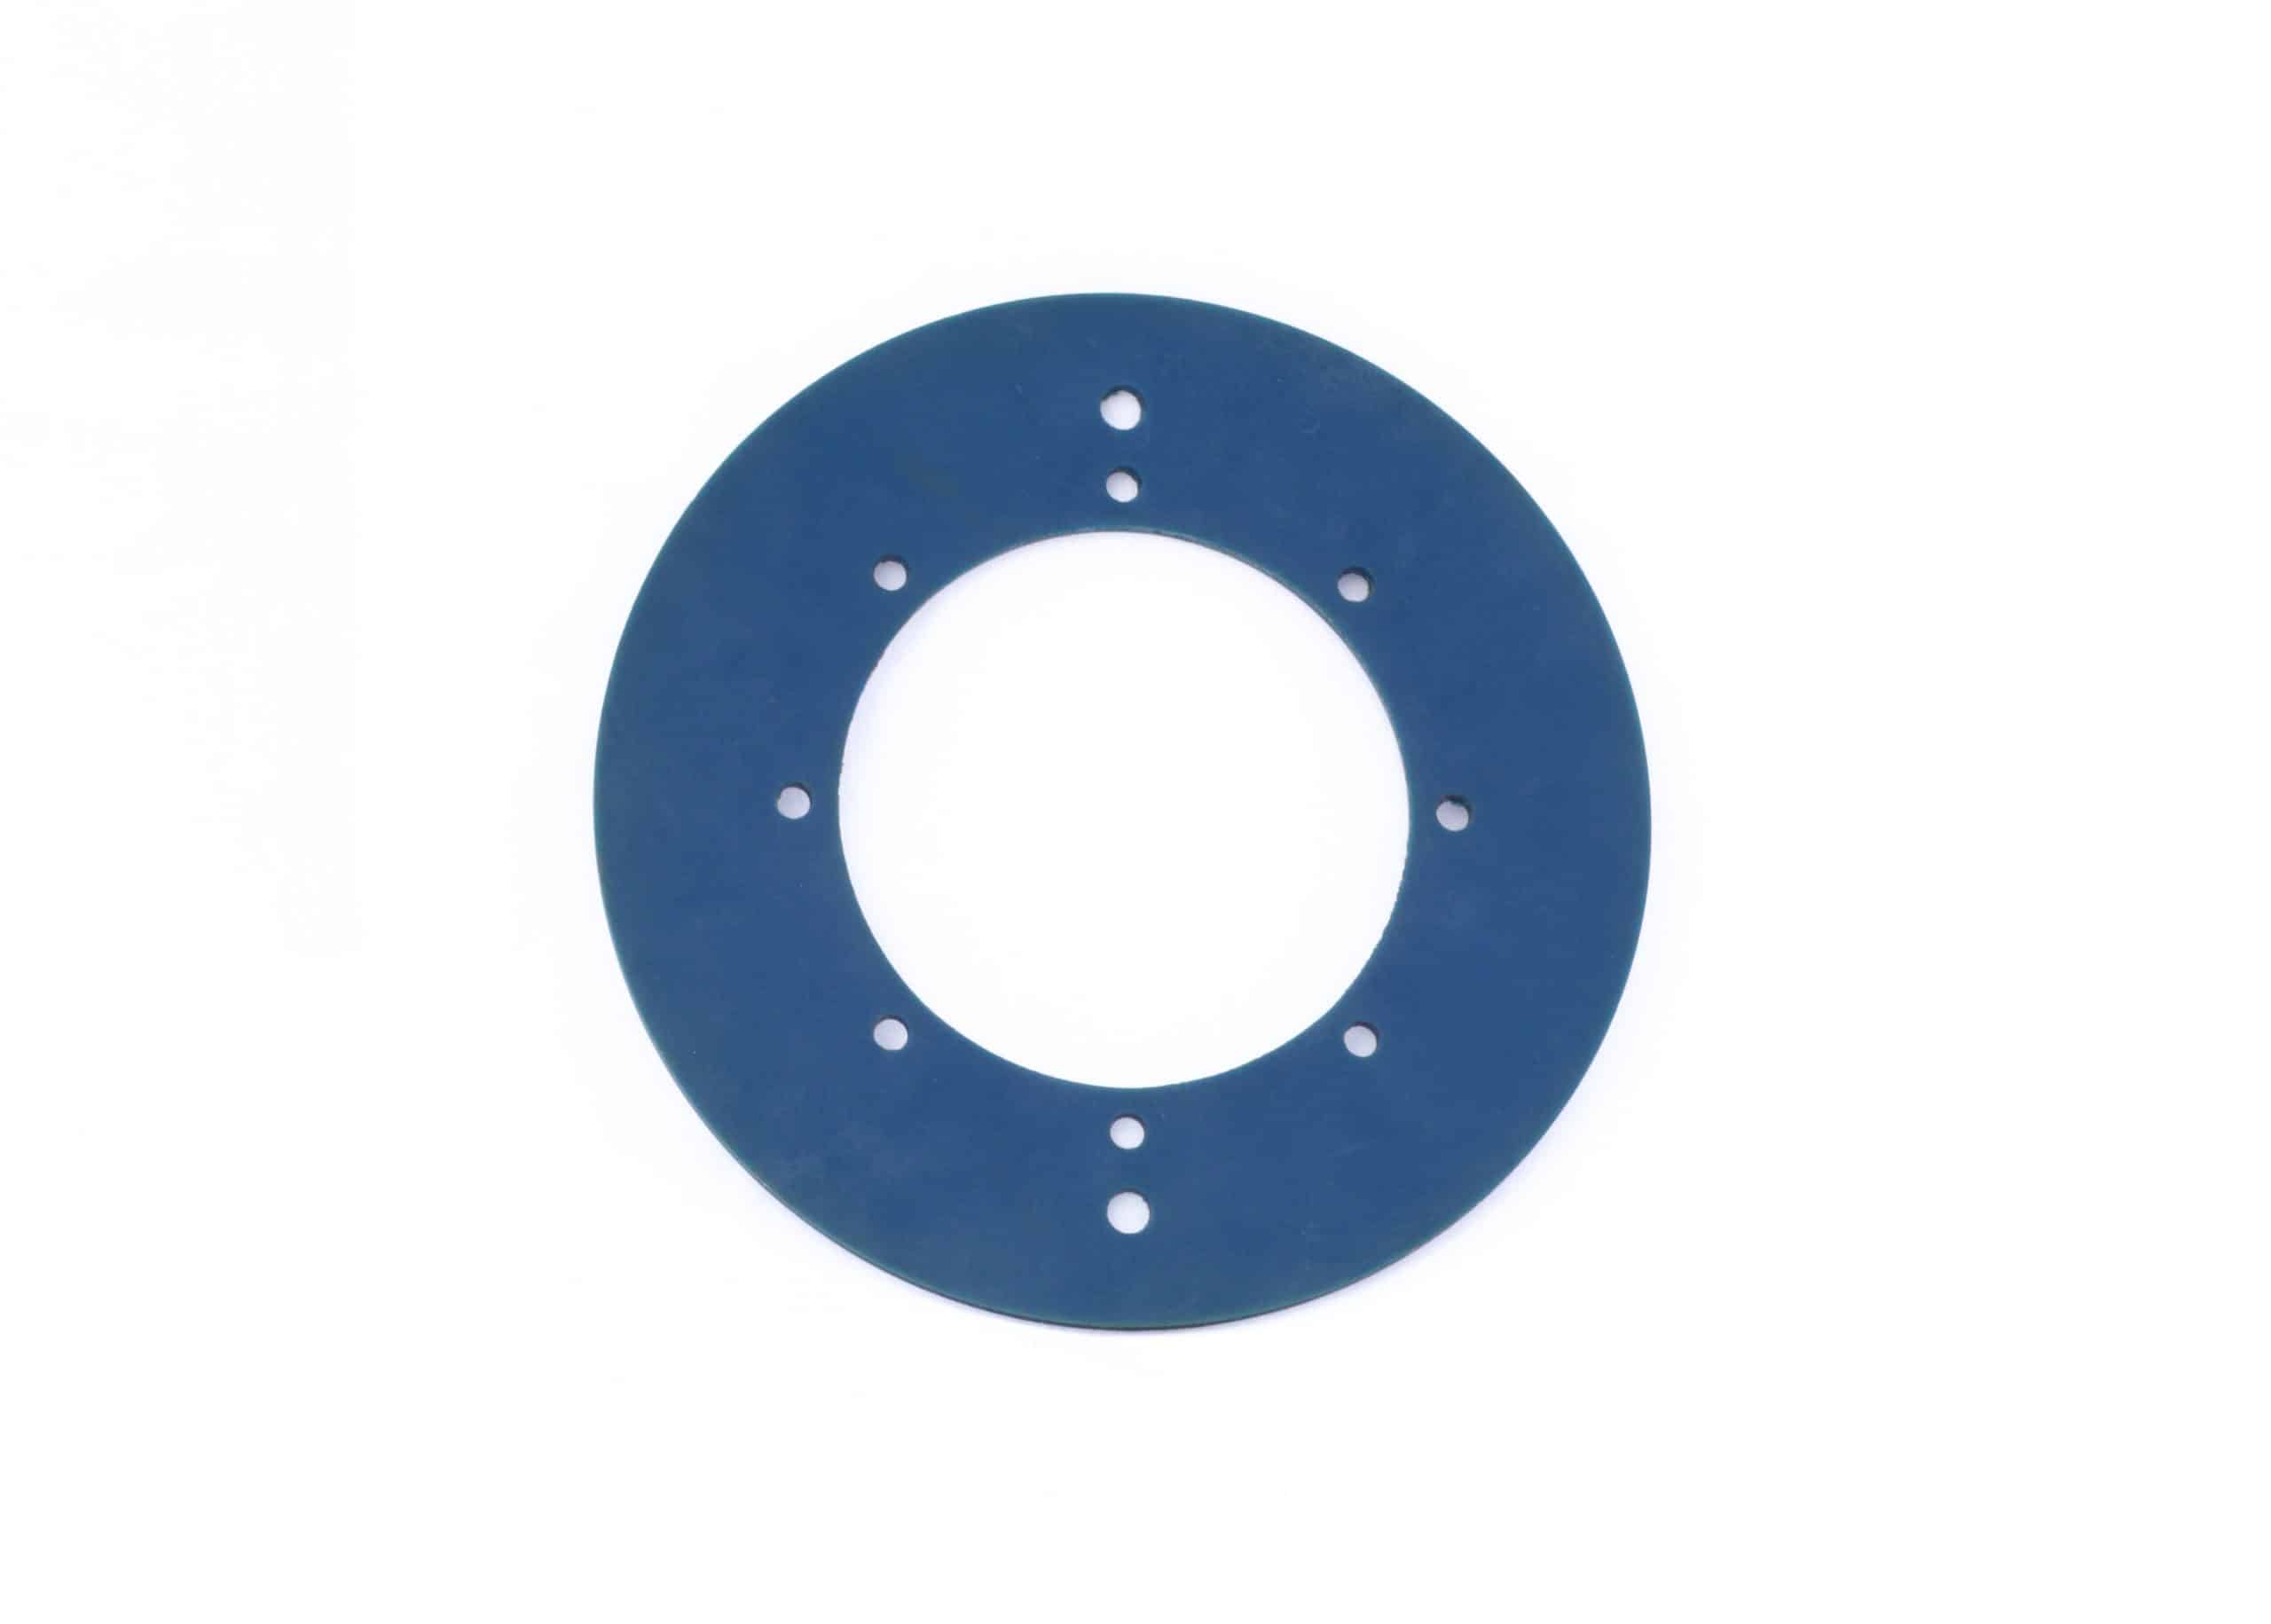 Polyurethane gasket with bolt pattern around ID for emplacement. 